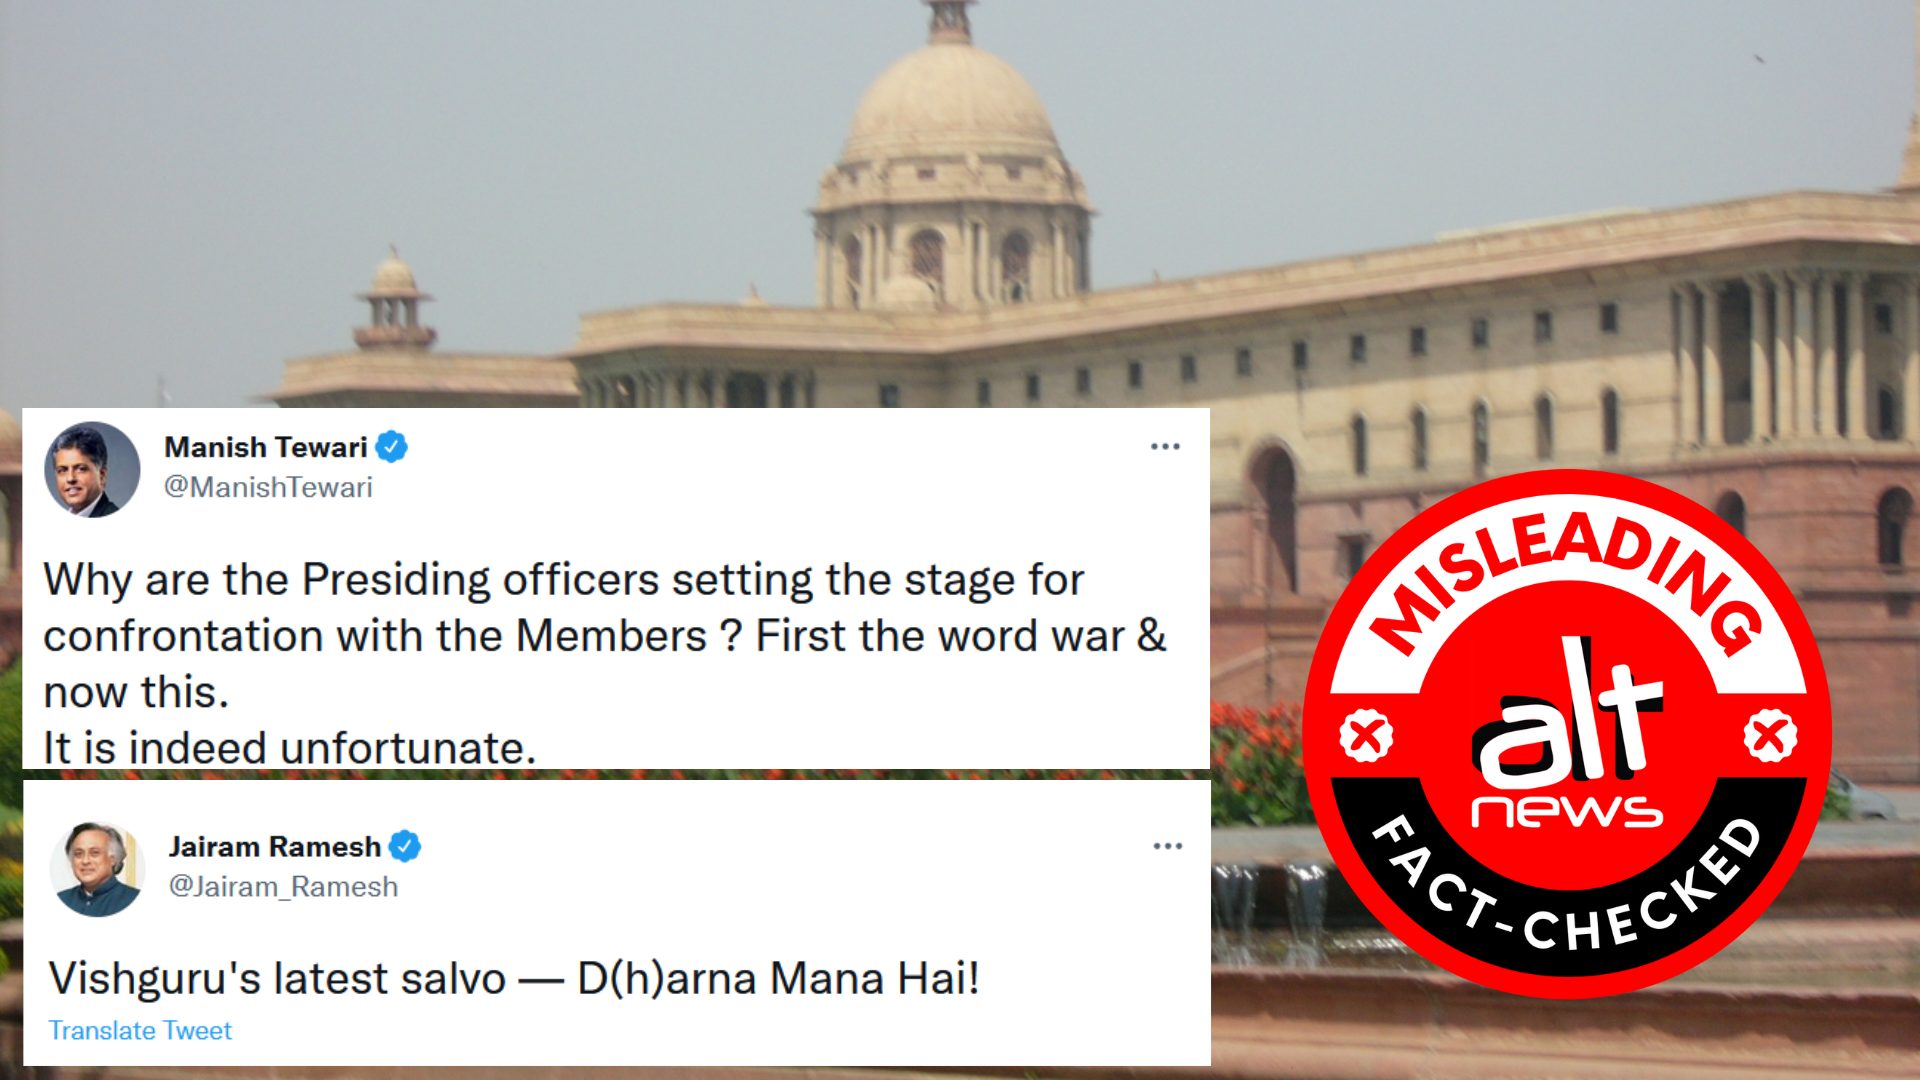 Circular prohibiting protest in Parliament House is not new - Alt News